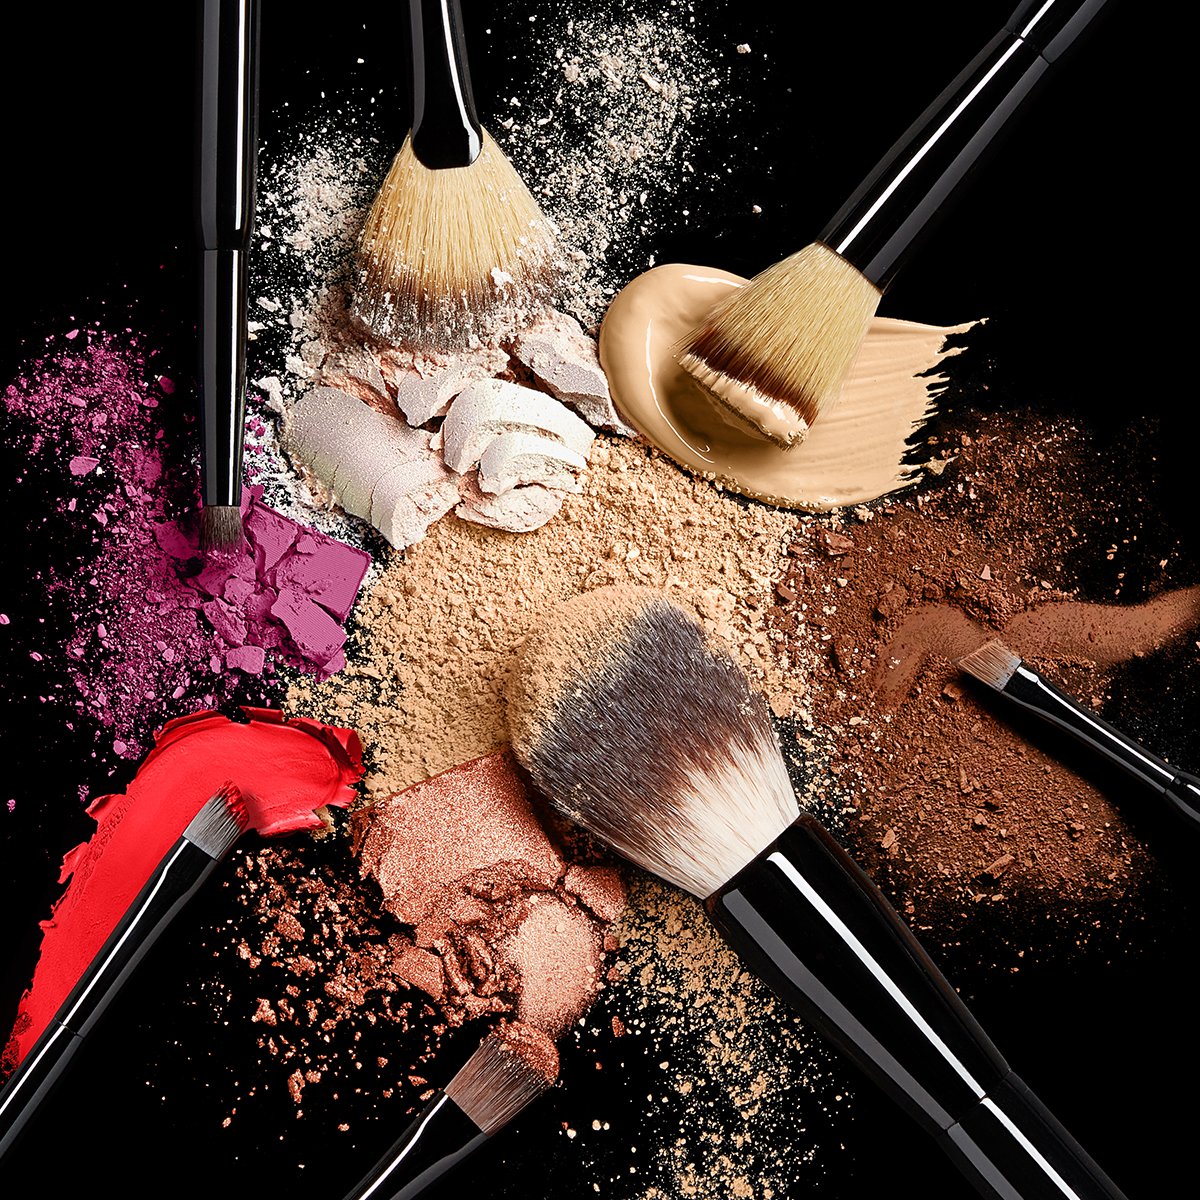 makeup brushes with coloured pigments and powders